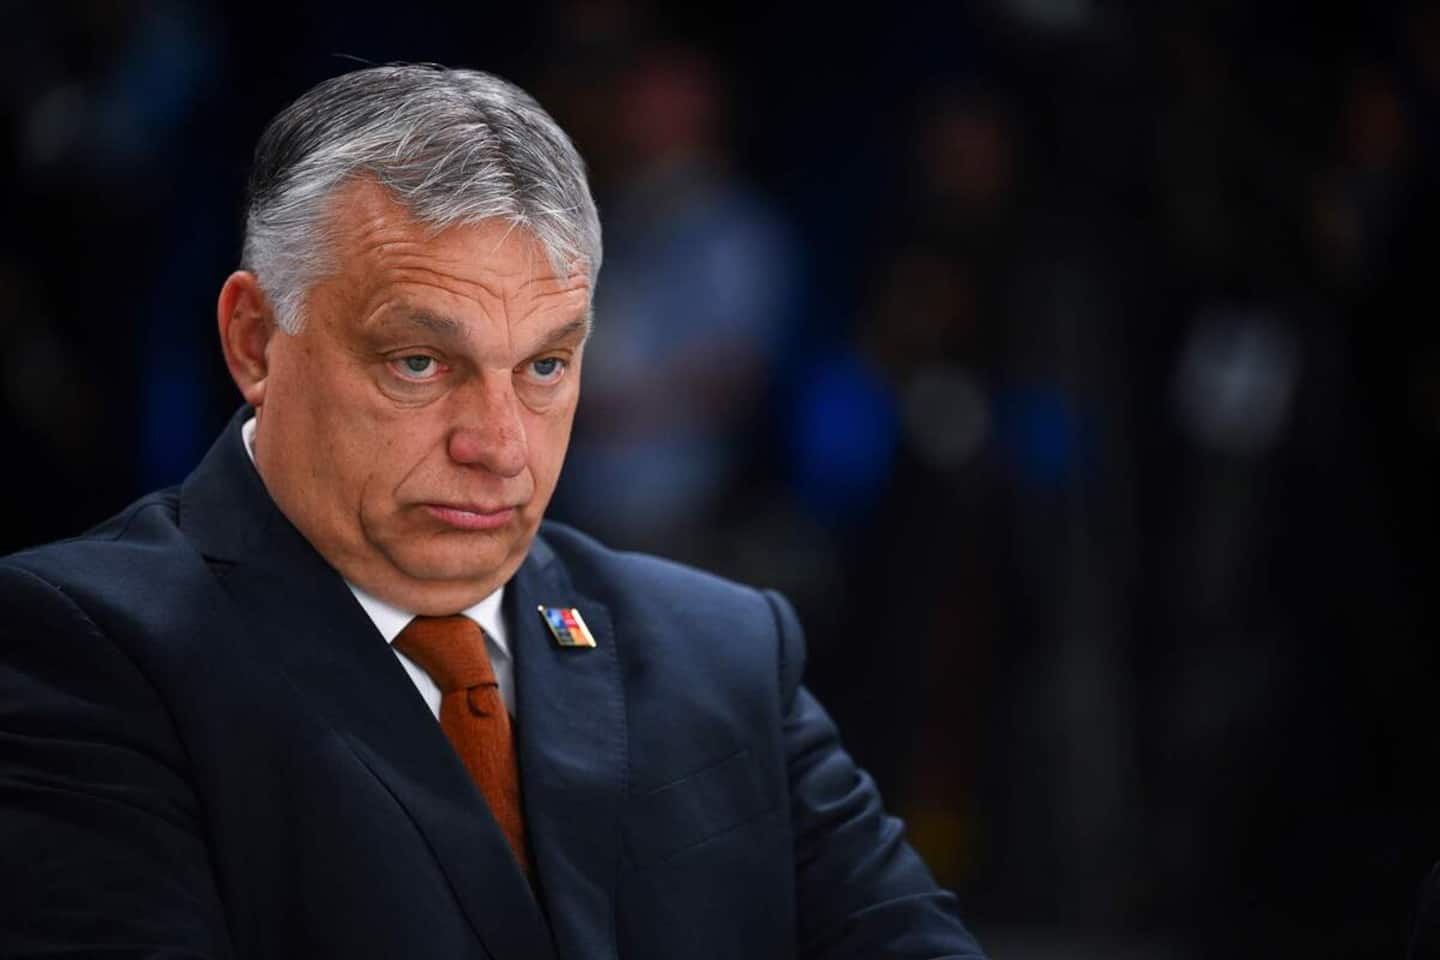 Orban and the Hungarian “race”: the Auschwitz committee says it is “horrified”